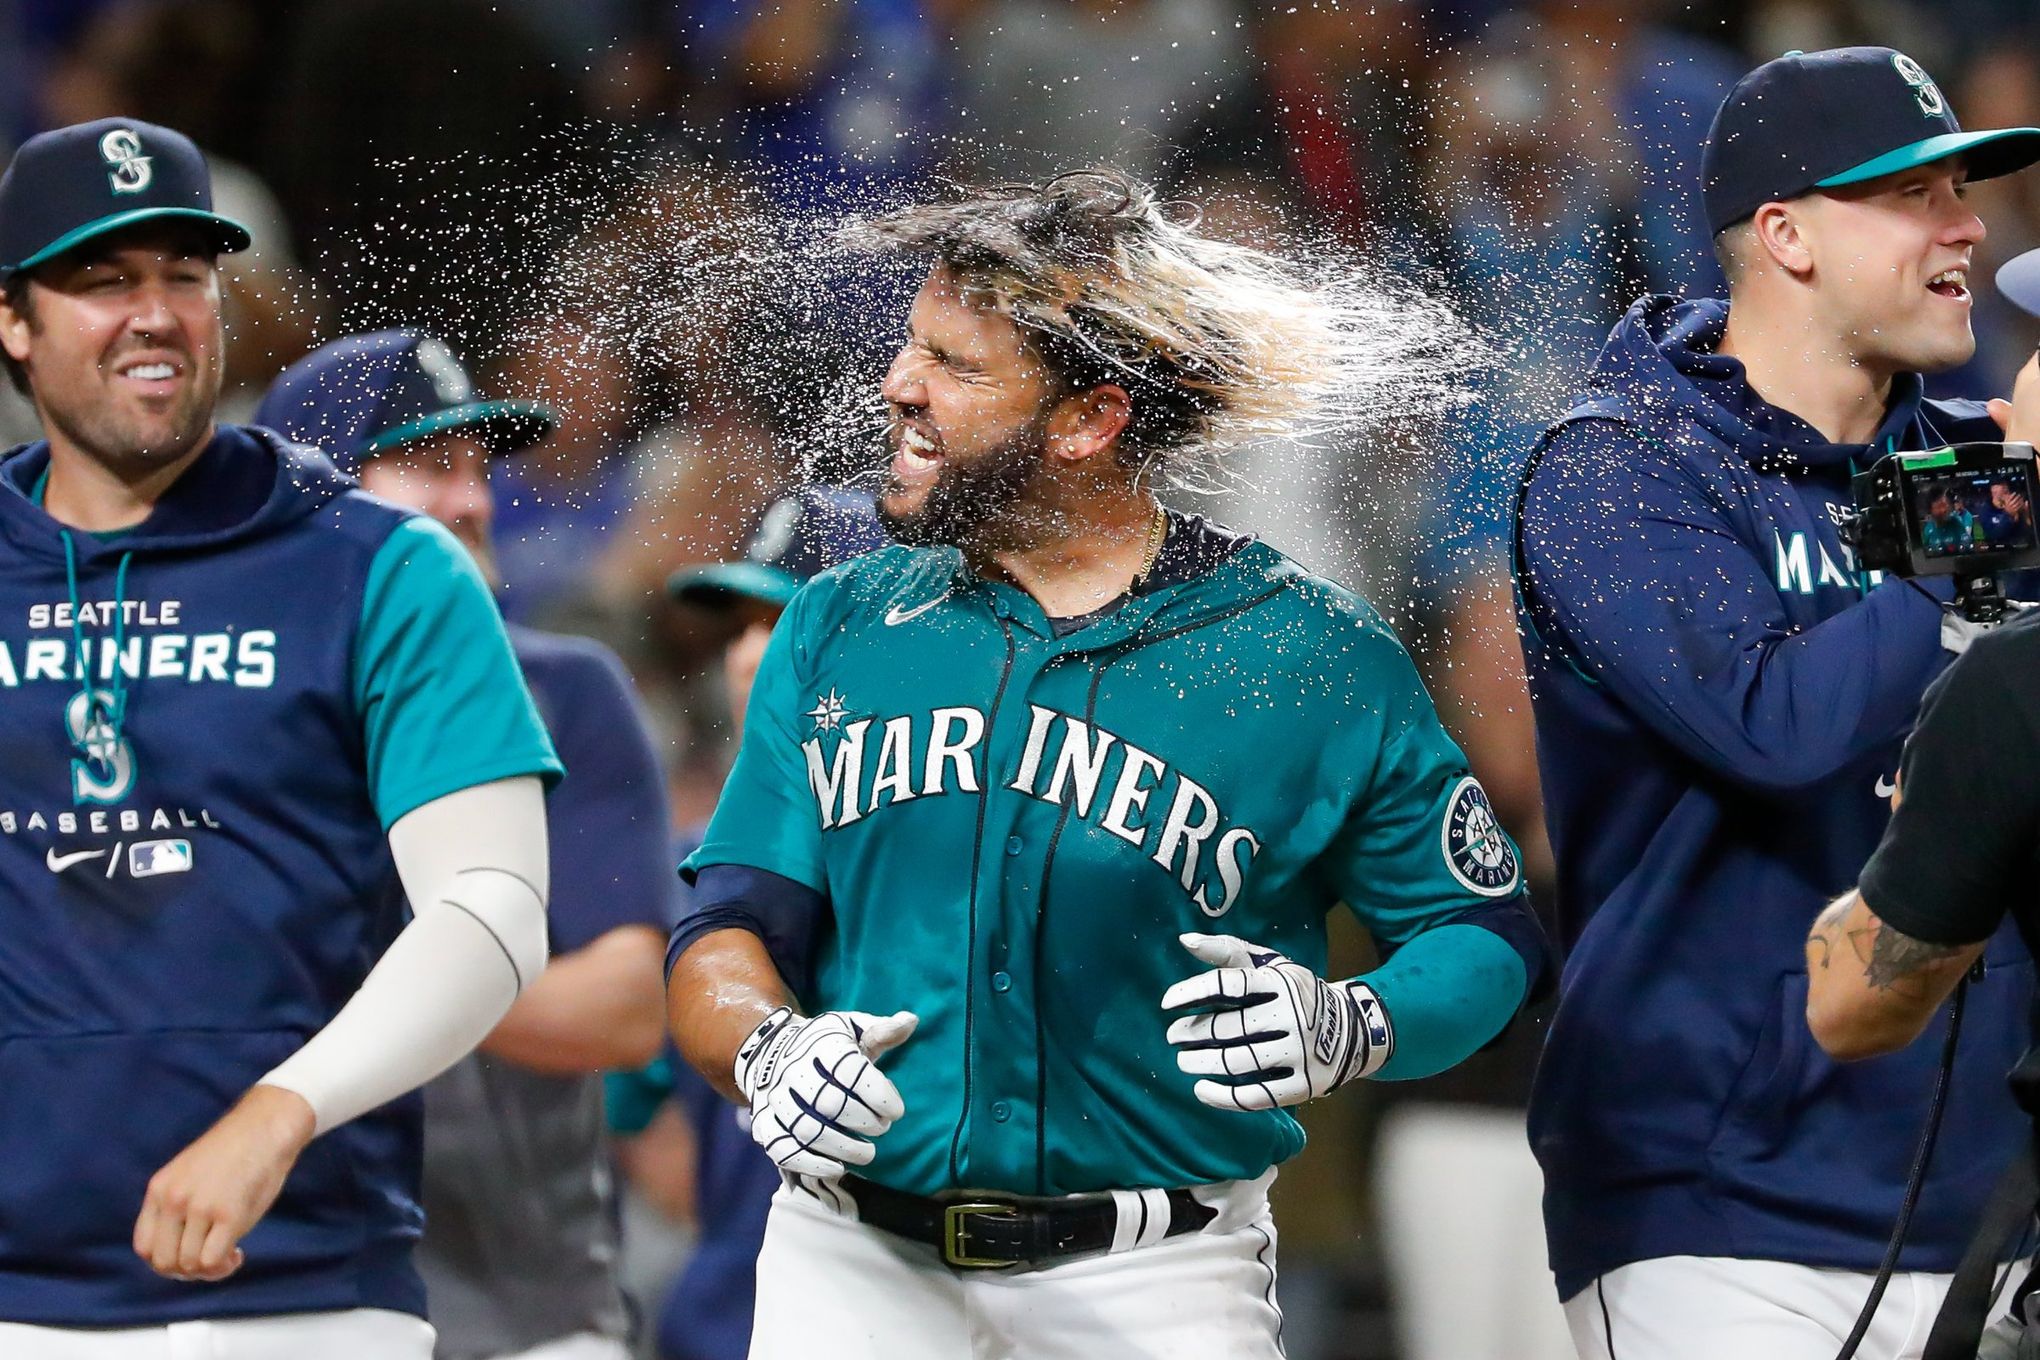 Most HRs since 2018? Well that's our own Eugenio Suárez with 151 HRs. :  r/Mariners